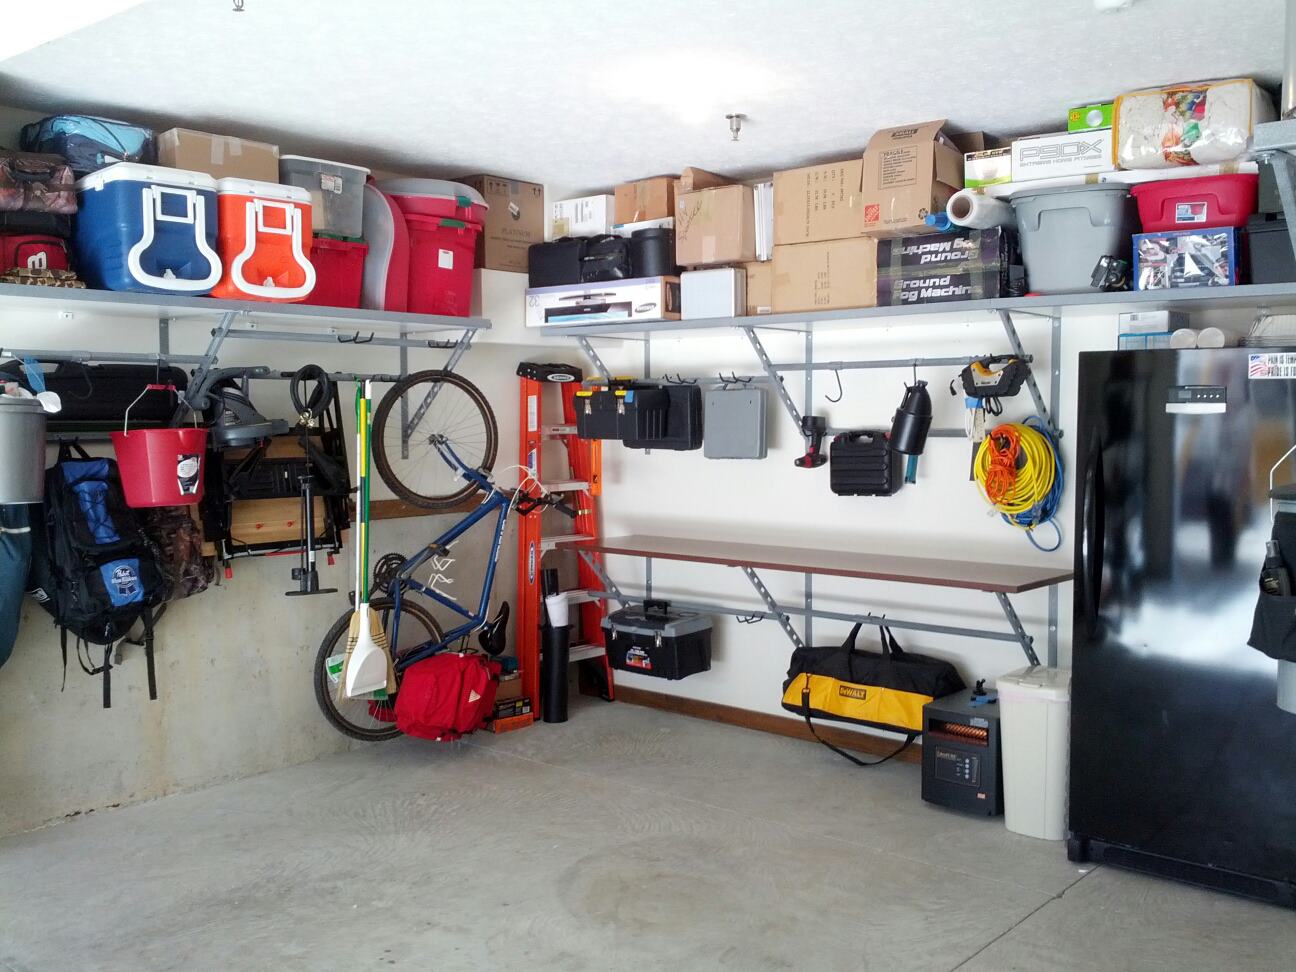 pictures of organized garages photo - 2